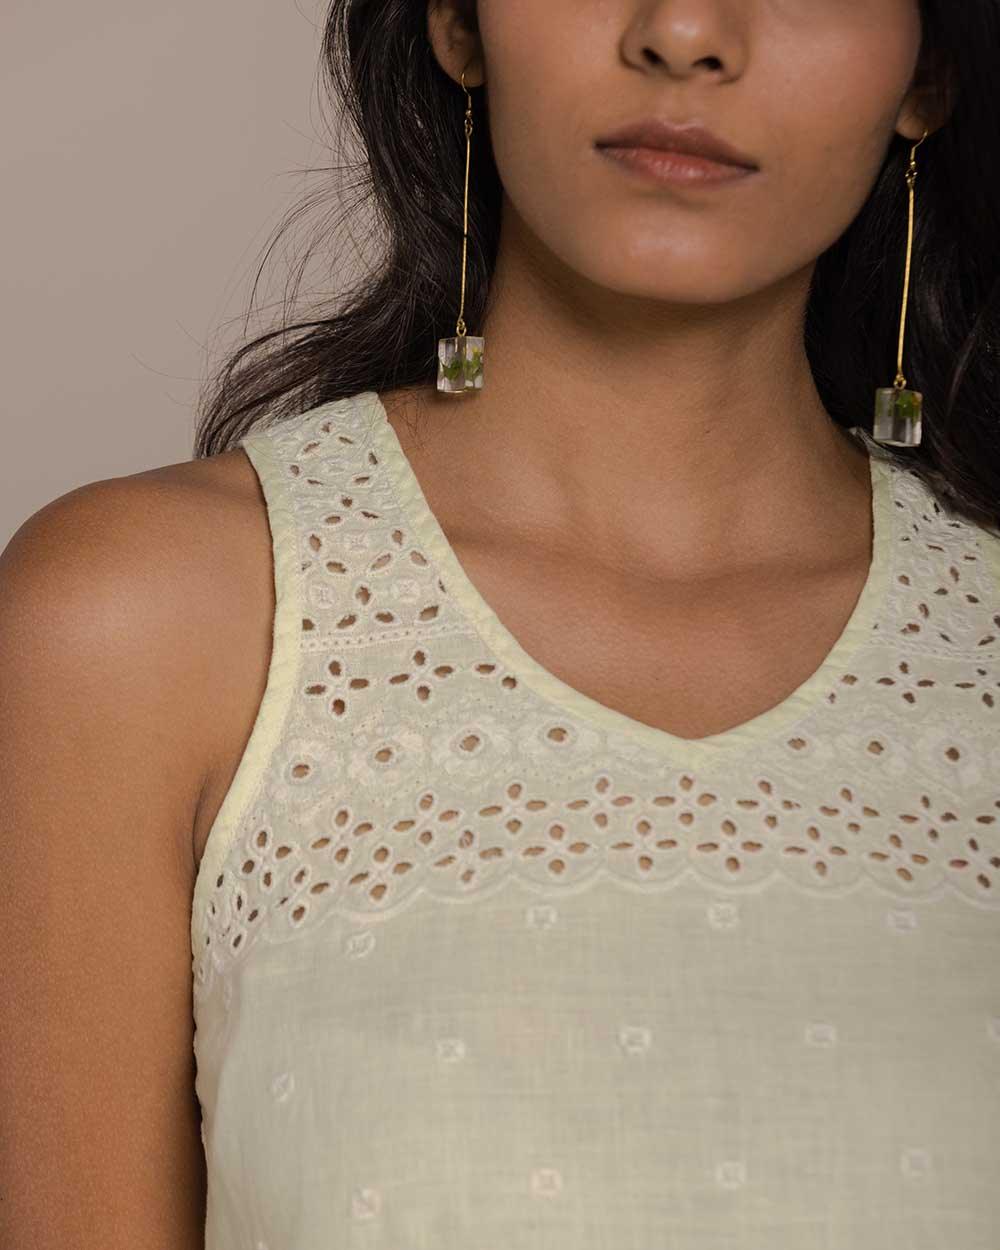 lemon yellow camisole top with v neck and embroidered details 